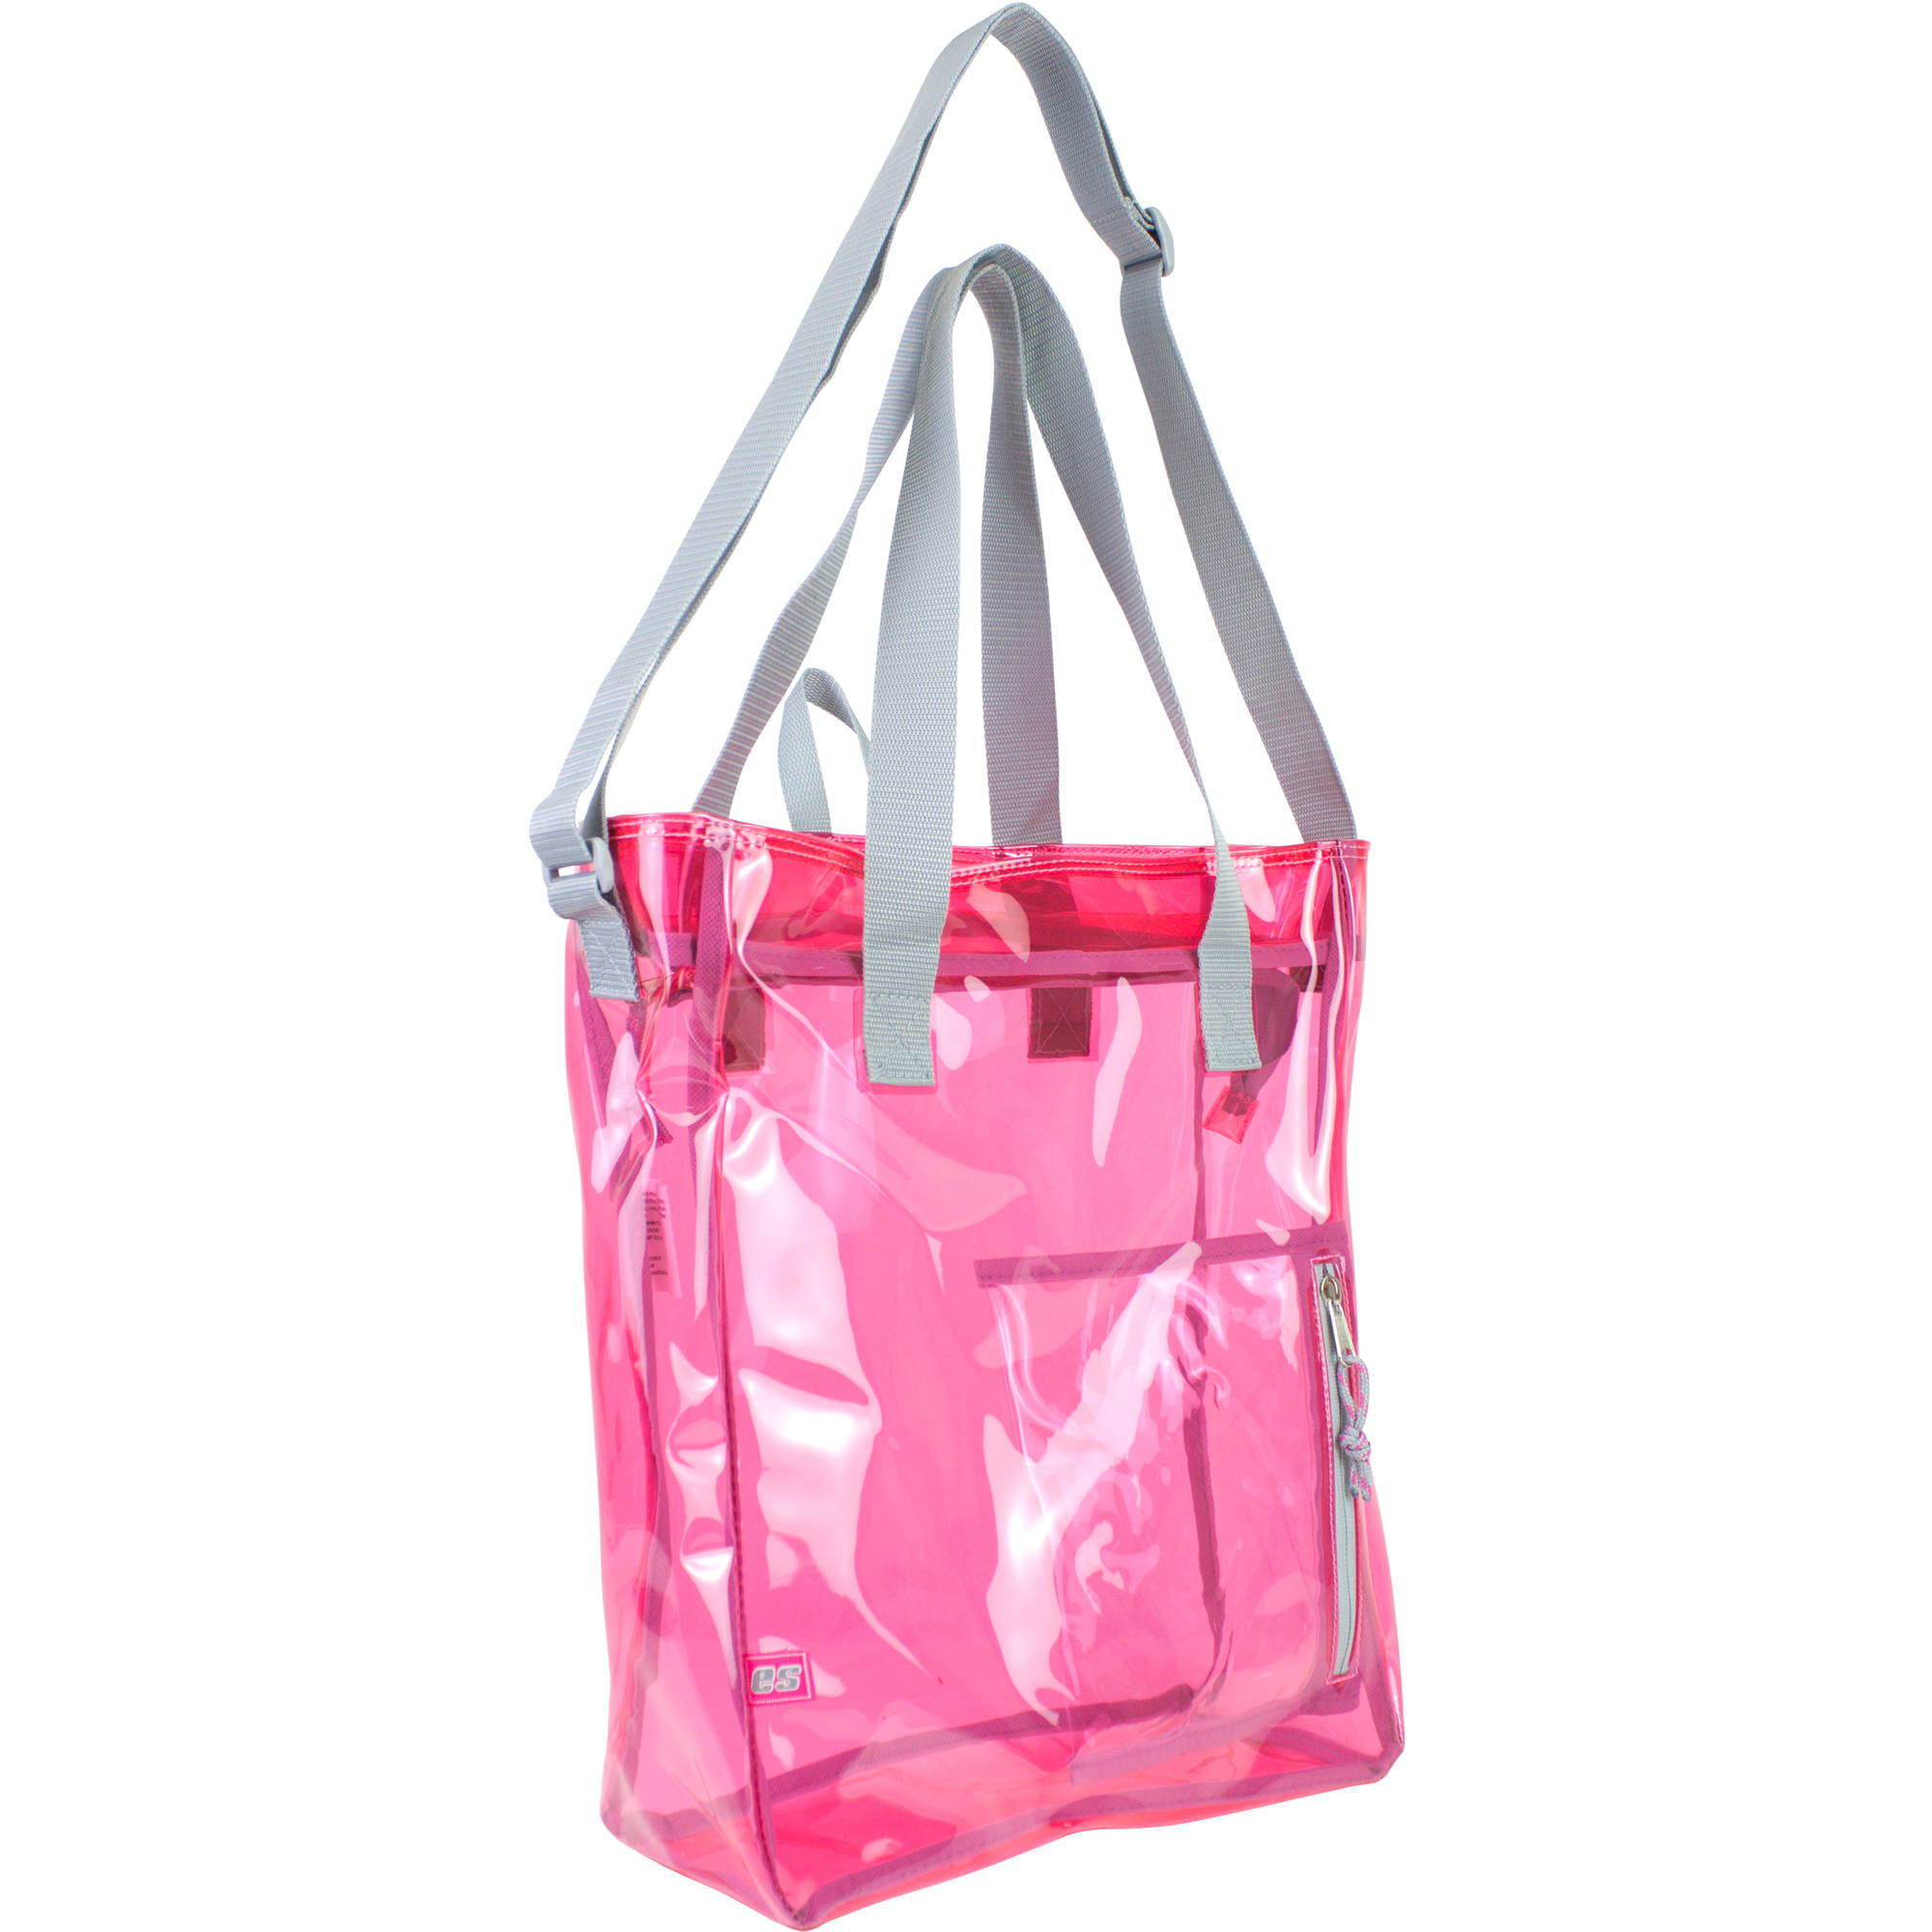 Eastsport Tinted Clear Tote Bag - image 1 of 4